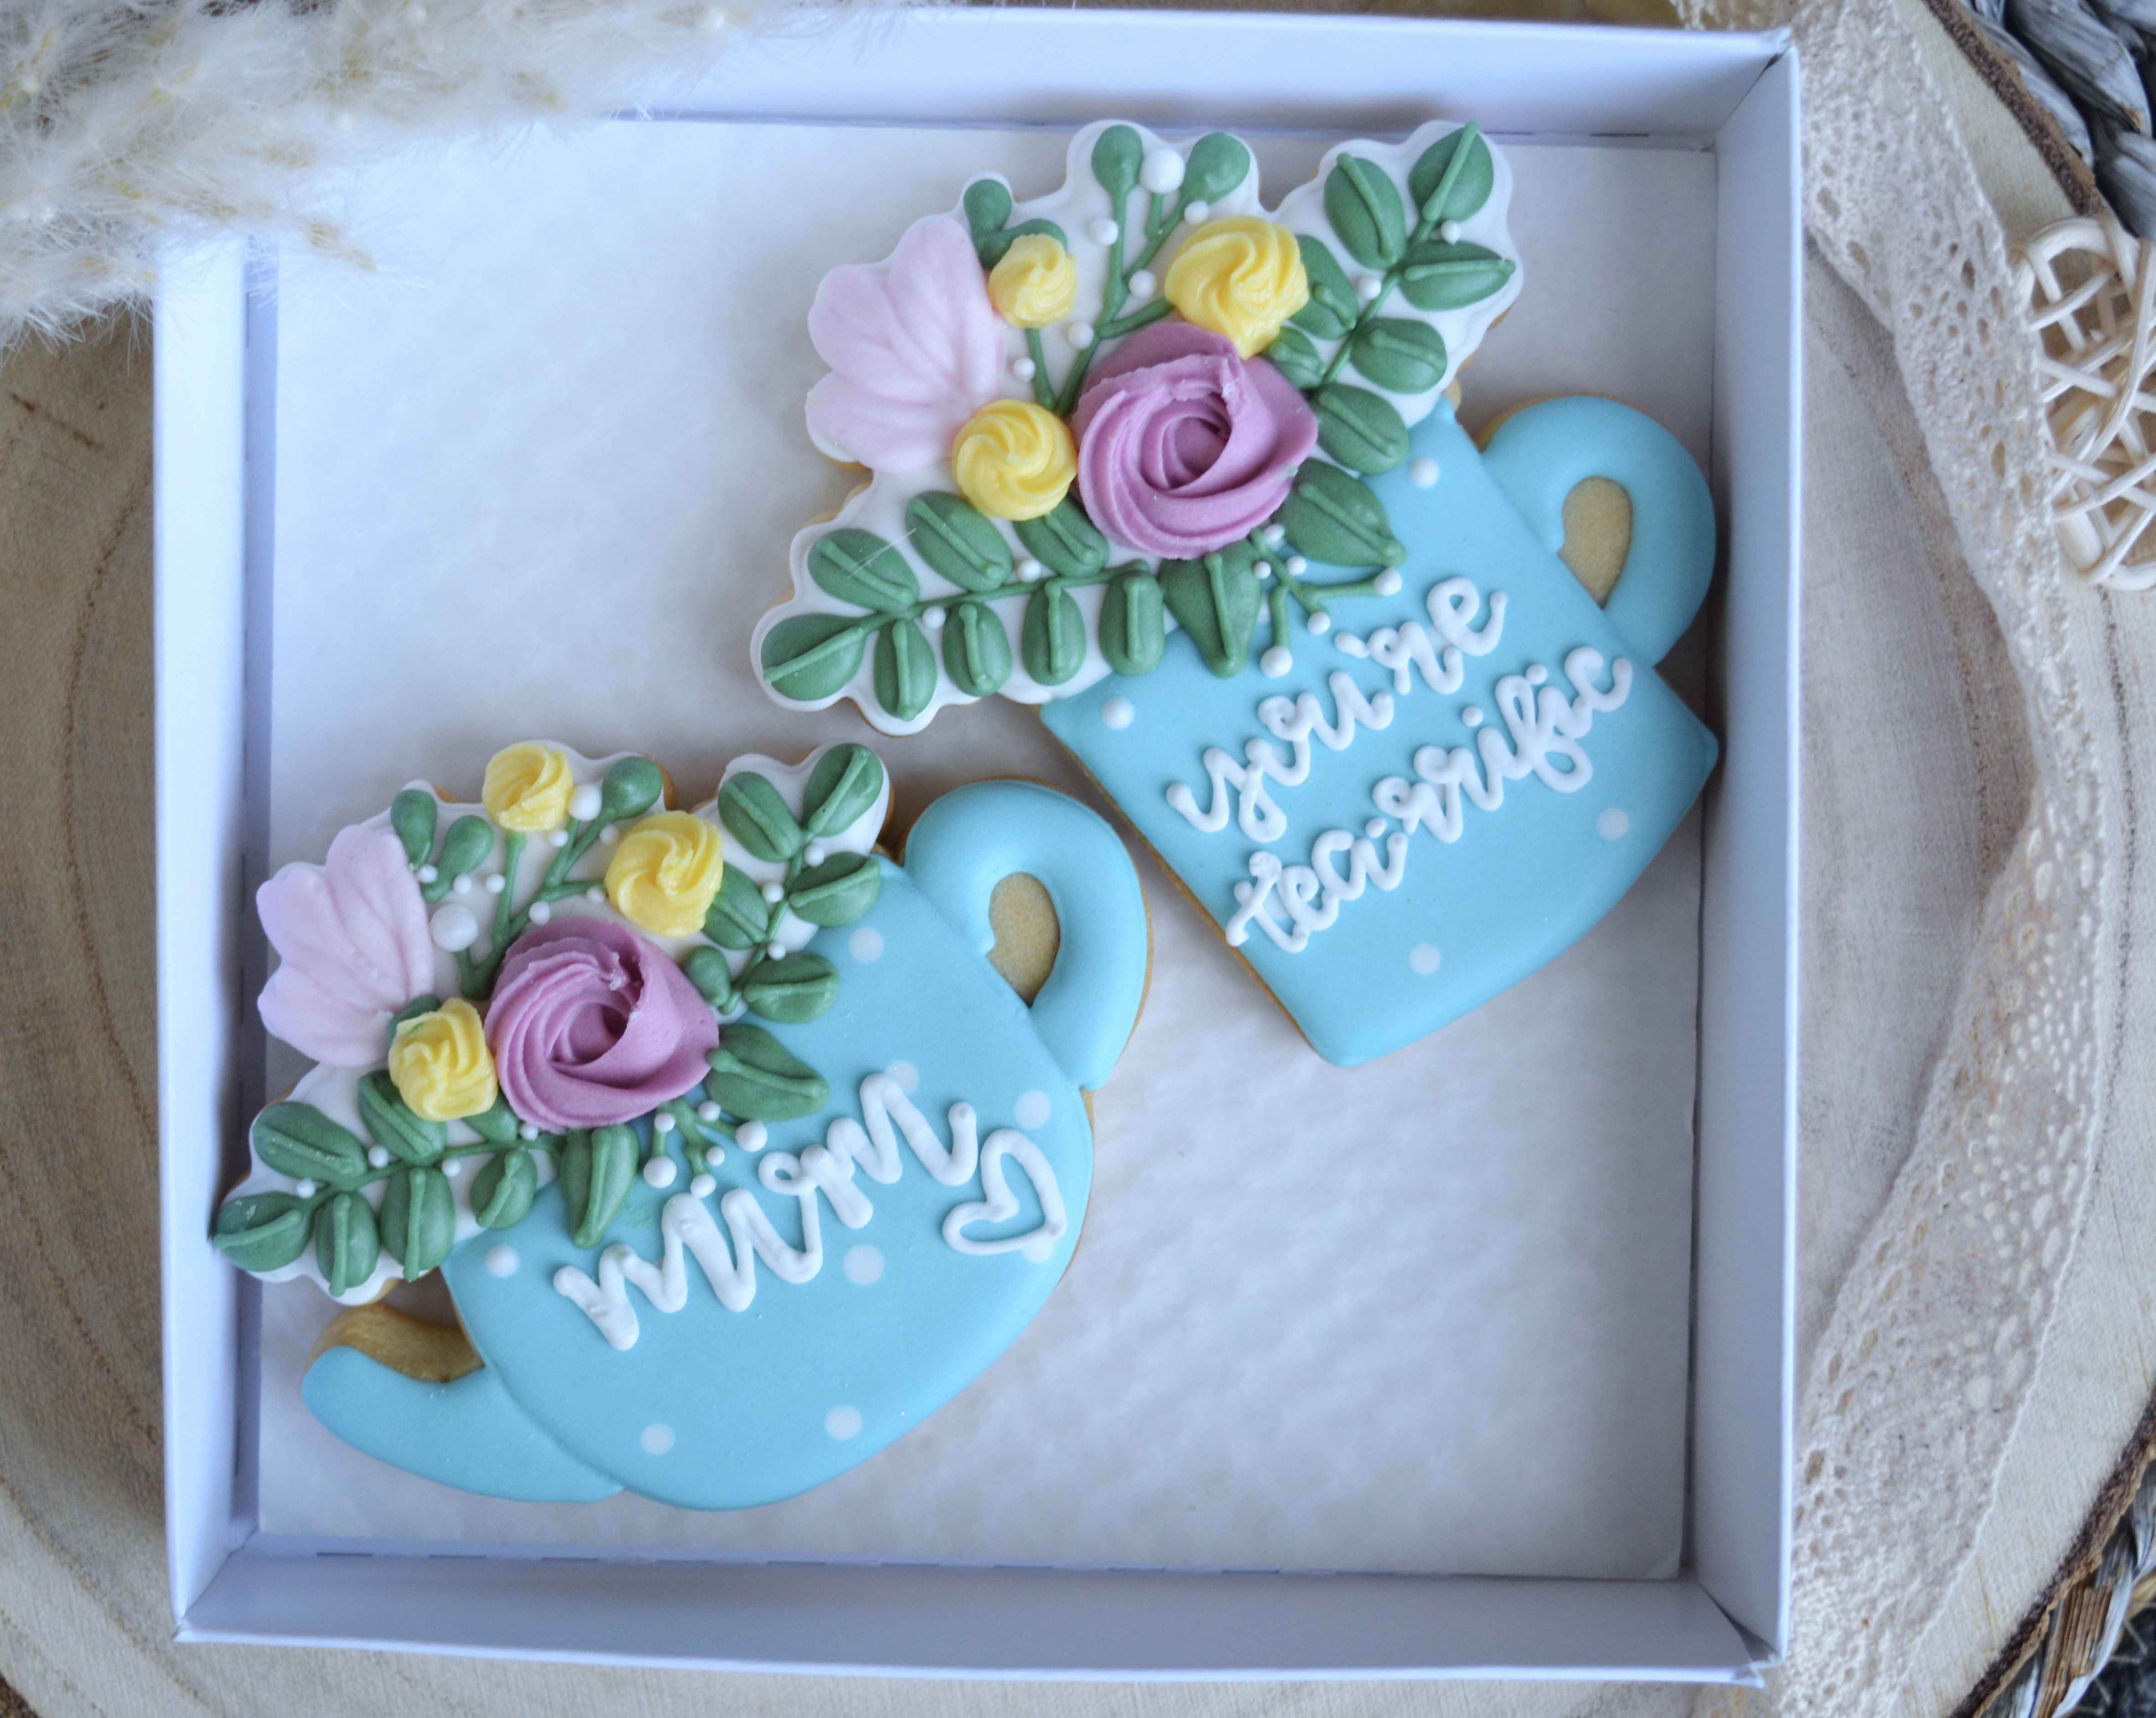 Tearrific Mum set-Happy Mother's Day-Mother's Day-Mother's Day Gift-Birthday Gift-Anniversary gift-Thank you gift-Cookies-Biscuits